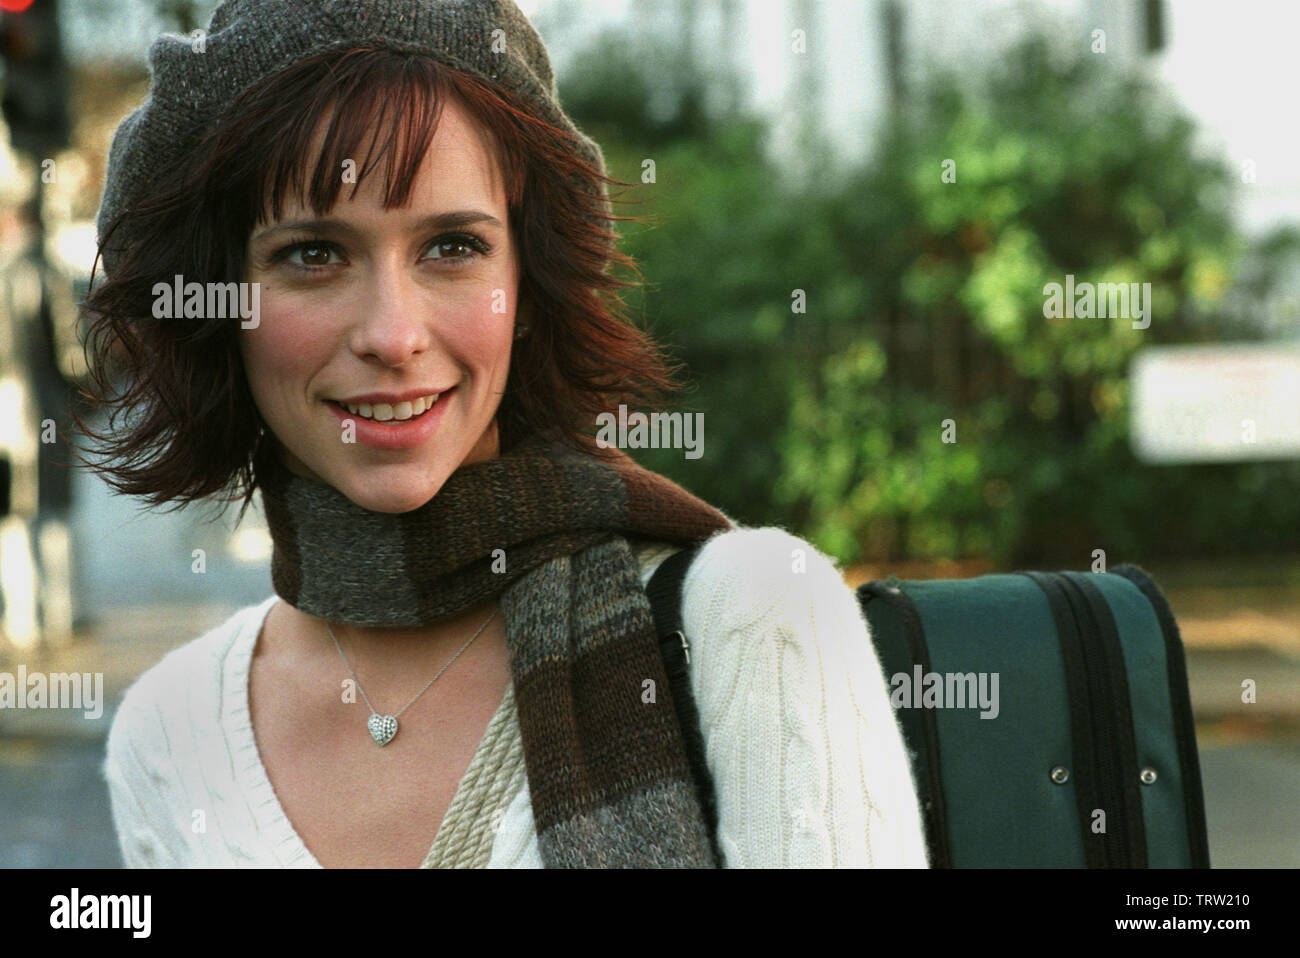 JENNIFER LOVE HEWITT in IF ONLY (2004). Copyright: Editorial use only. No merchandising or book covers. This is a publicly distributed handout. Access rights only, no license of copyright provided. Only to be reproduced in conjunction with promotion of this film. Credit: IF ONLY PRODUCTION SERVICES/OUTLAW PROD/BOX FILMS/ / Album Stock Photo